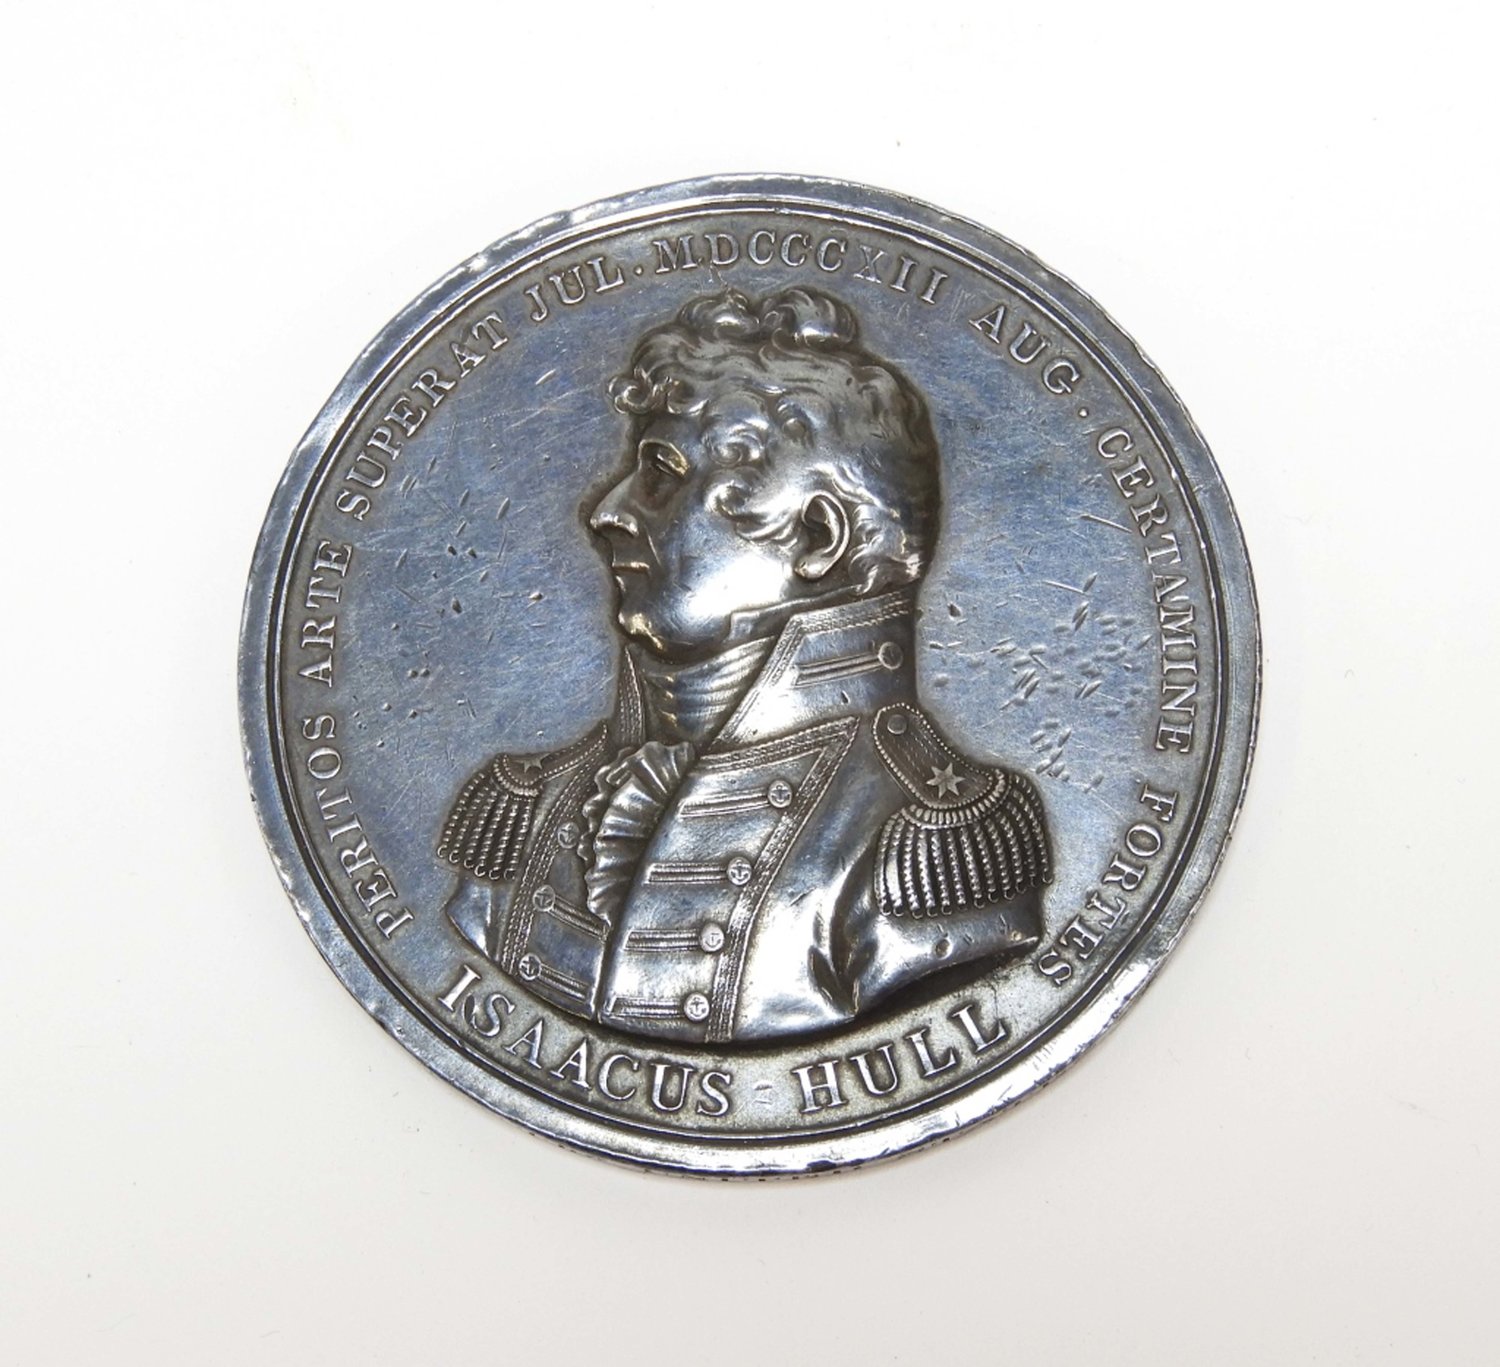 1812 silver medal presented by the U.S. Congress to Lt. Alexander Scammel Wadsworth, for gallantry in the naval battle USS Constitution vs. HMS Guerriere ($40,590).